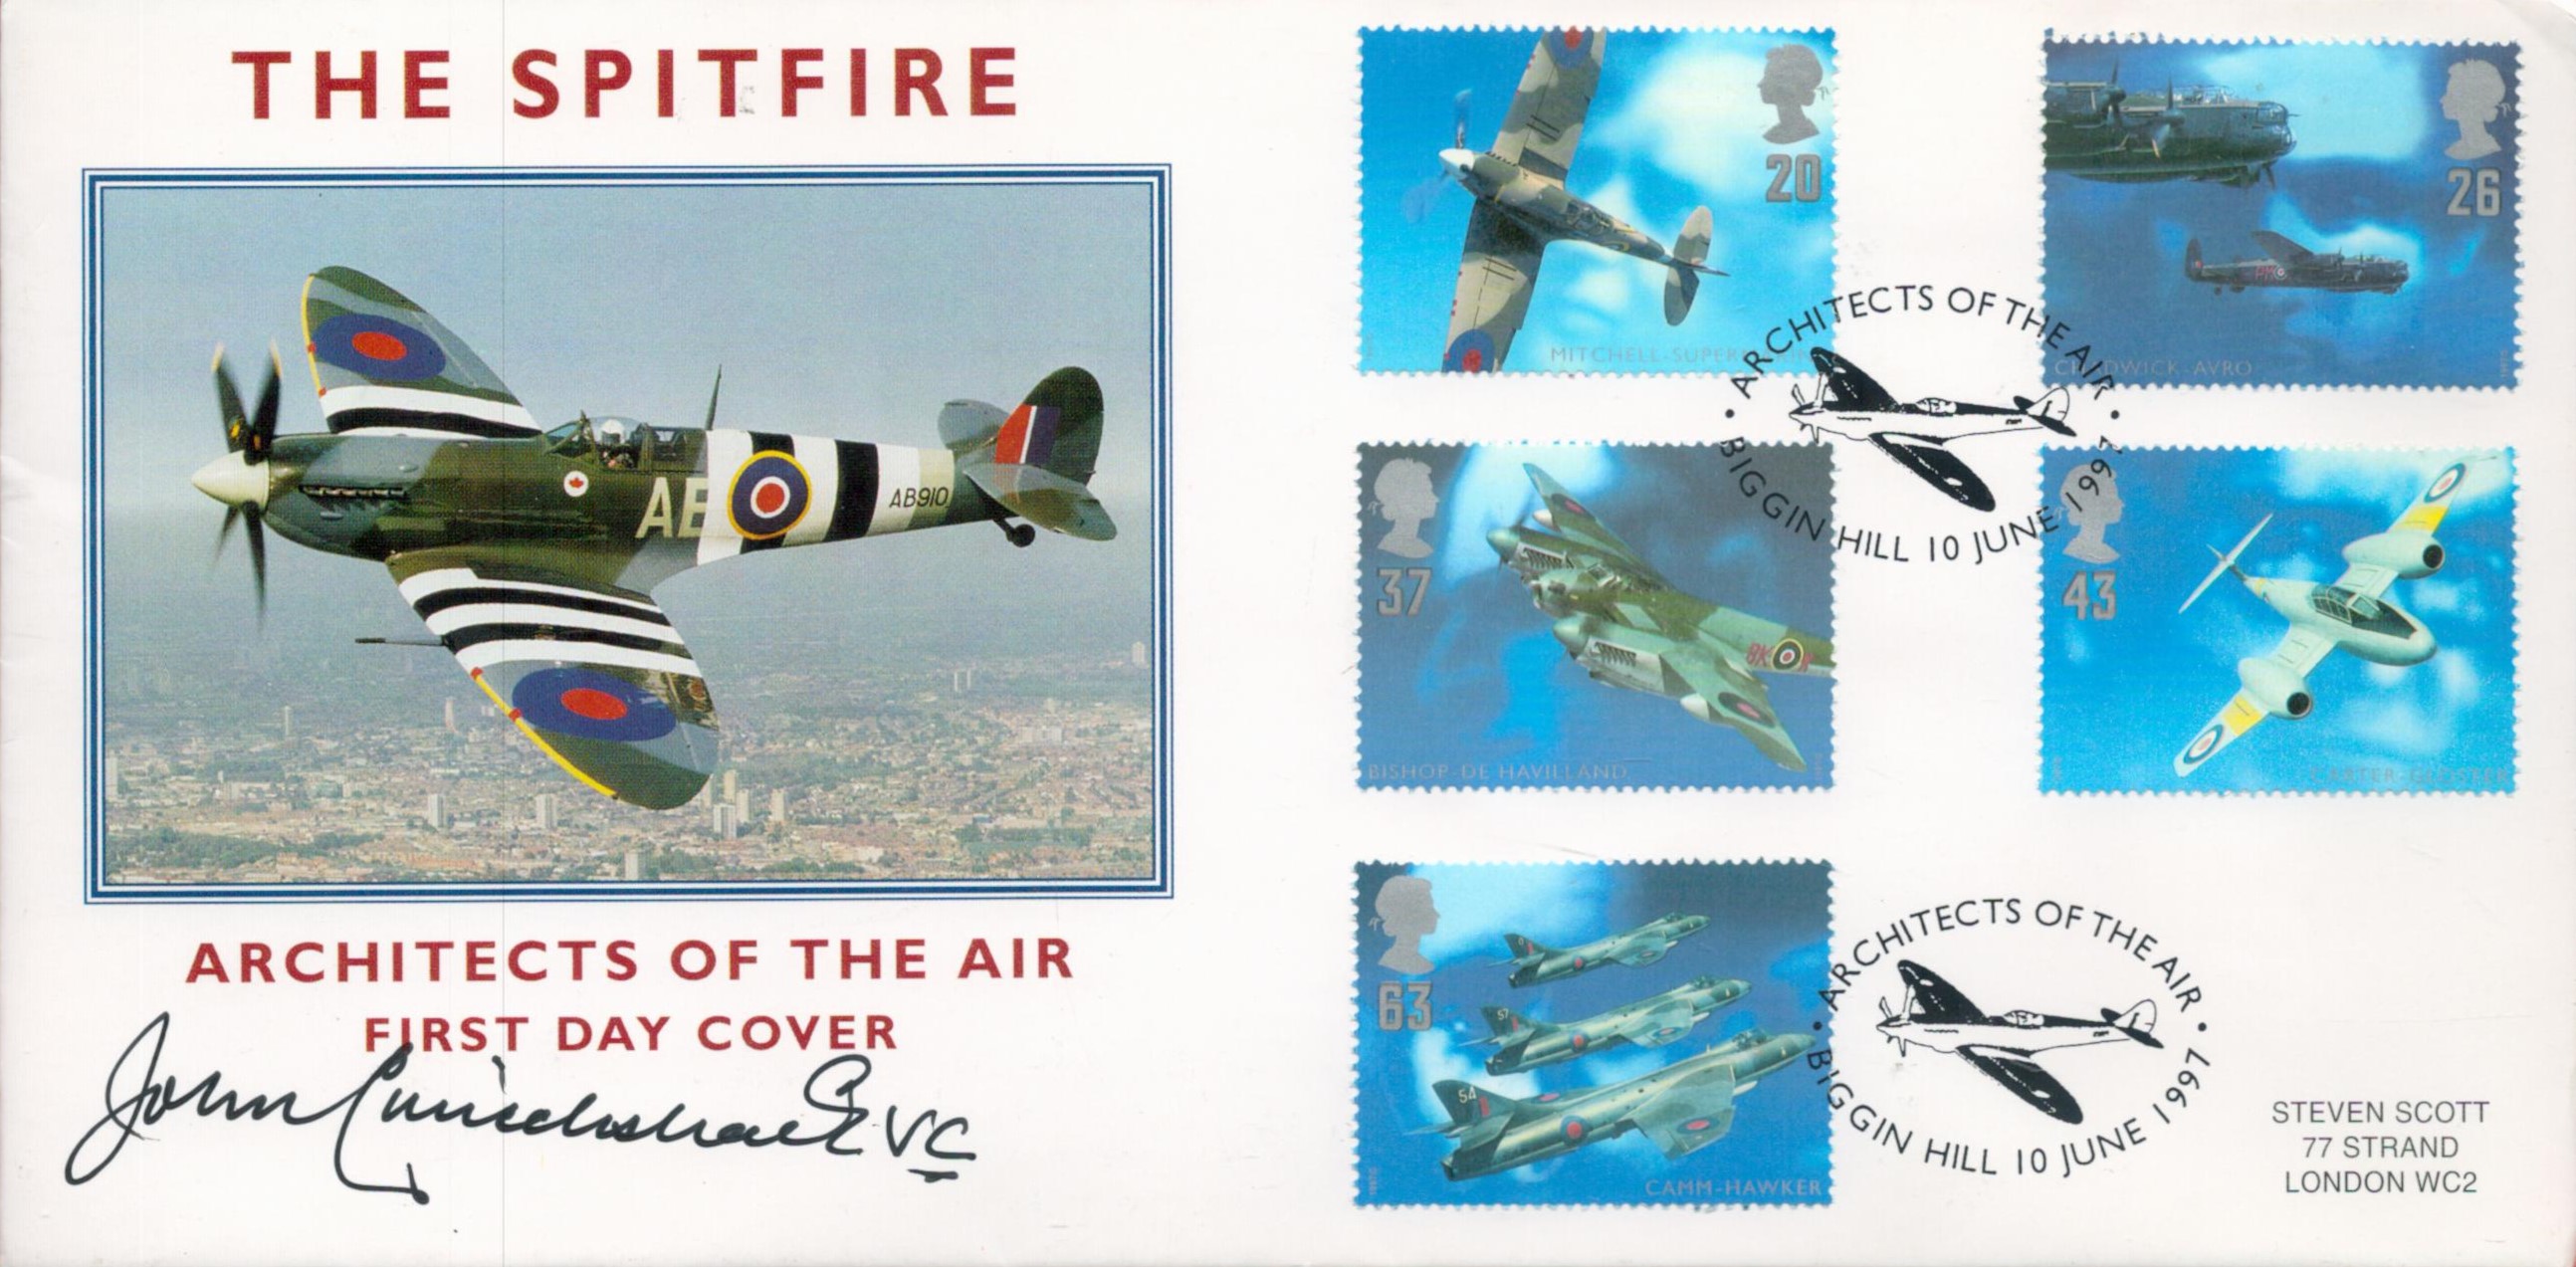 WW2 Flt Lt John Cruickshank Signed The Spitfire First Day Cover with 5 British Aviation Stamps and